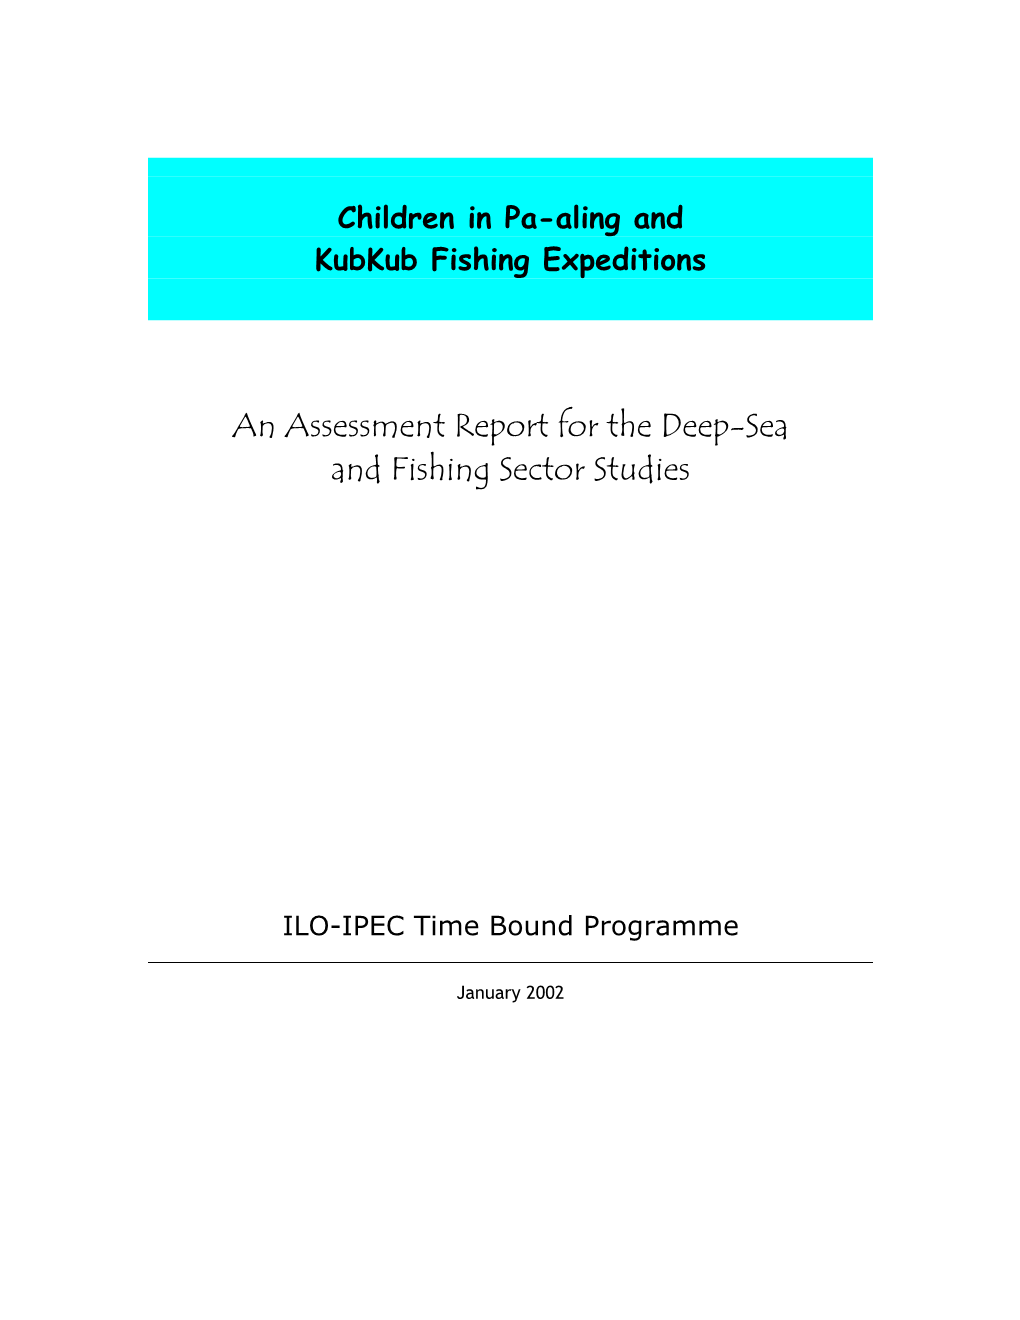 Children in Pa-Aling and Kubkub Fishing Expeditions: an Assessment Report for on the Deep-Sea